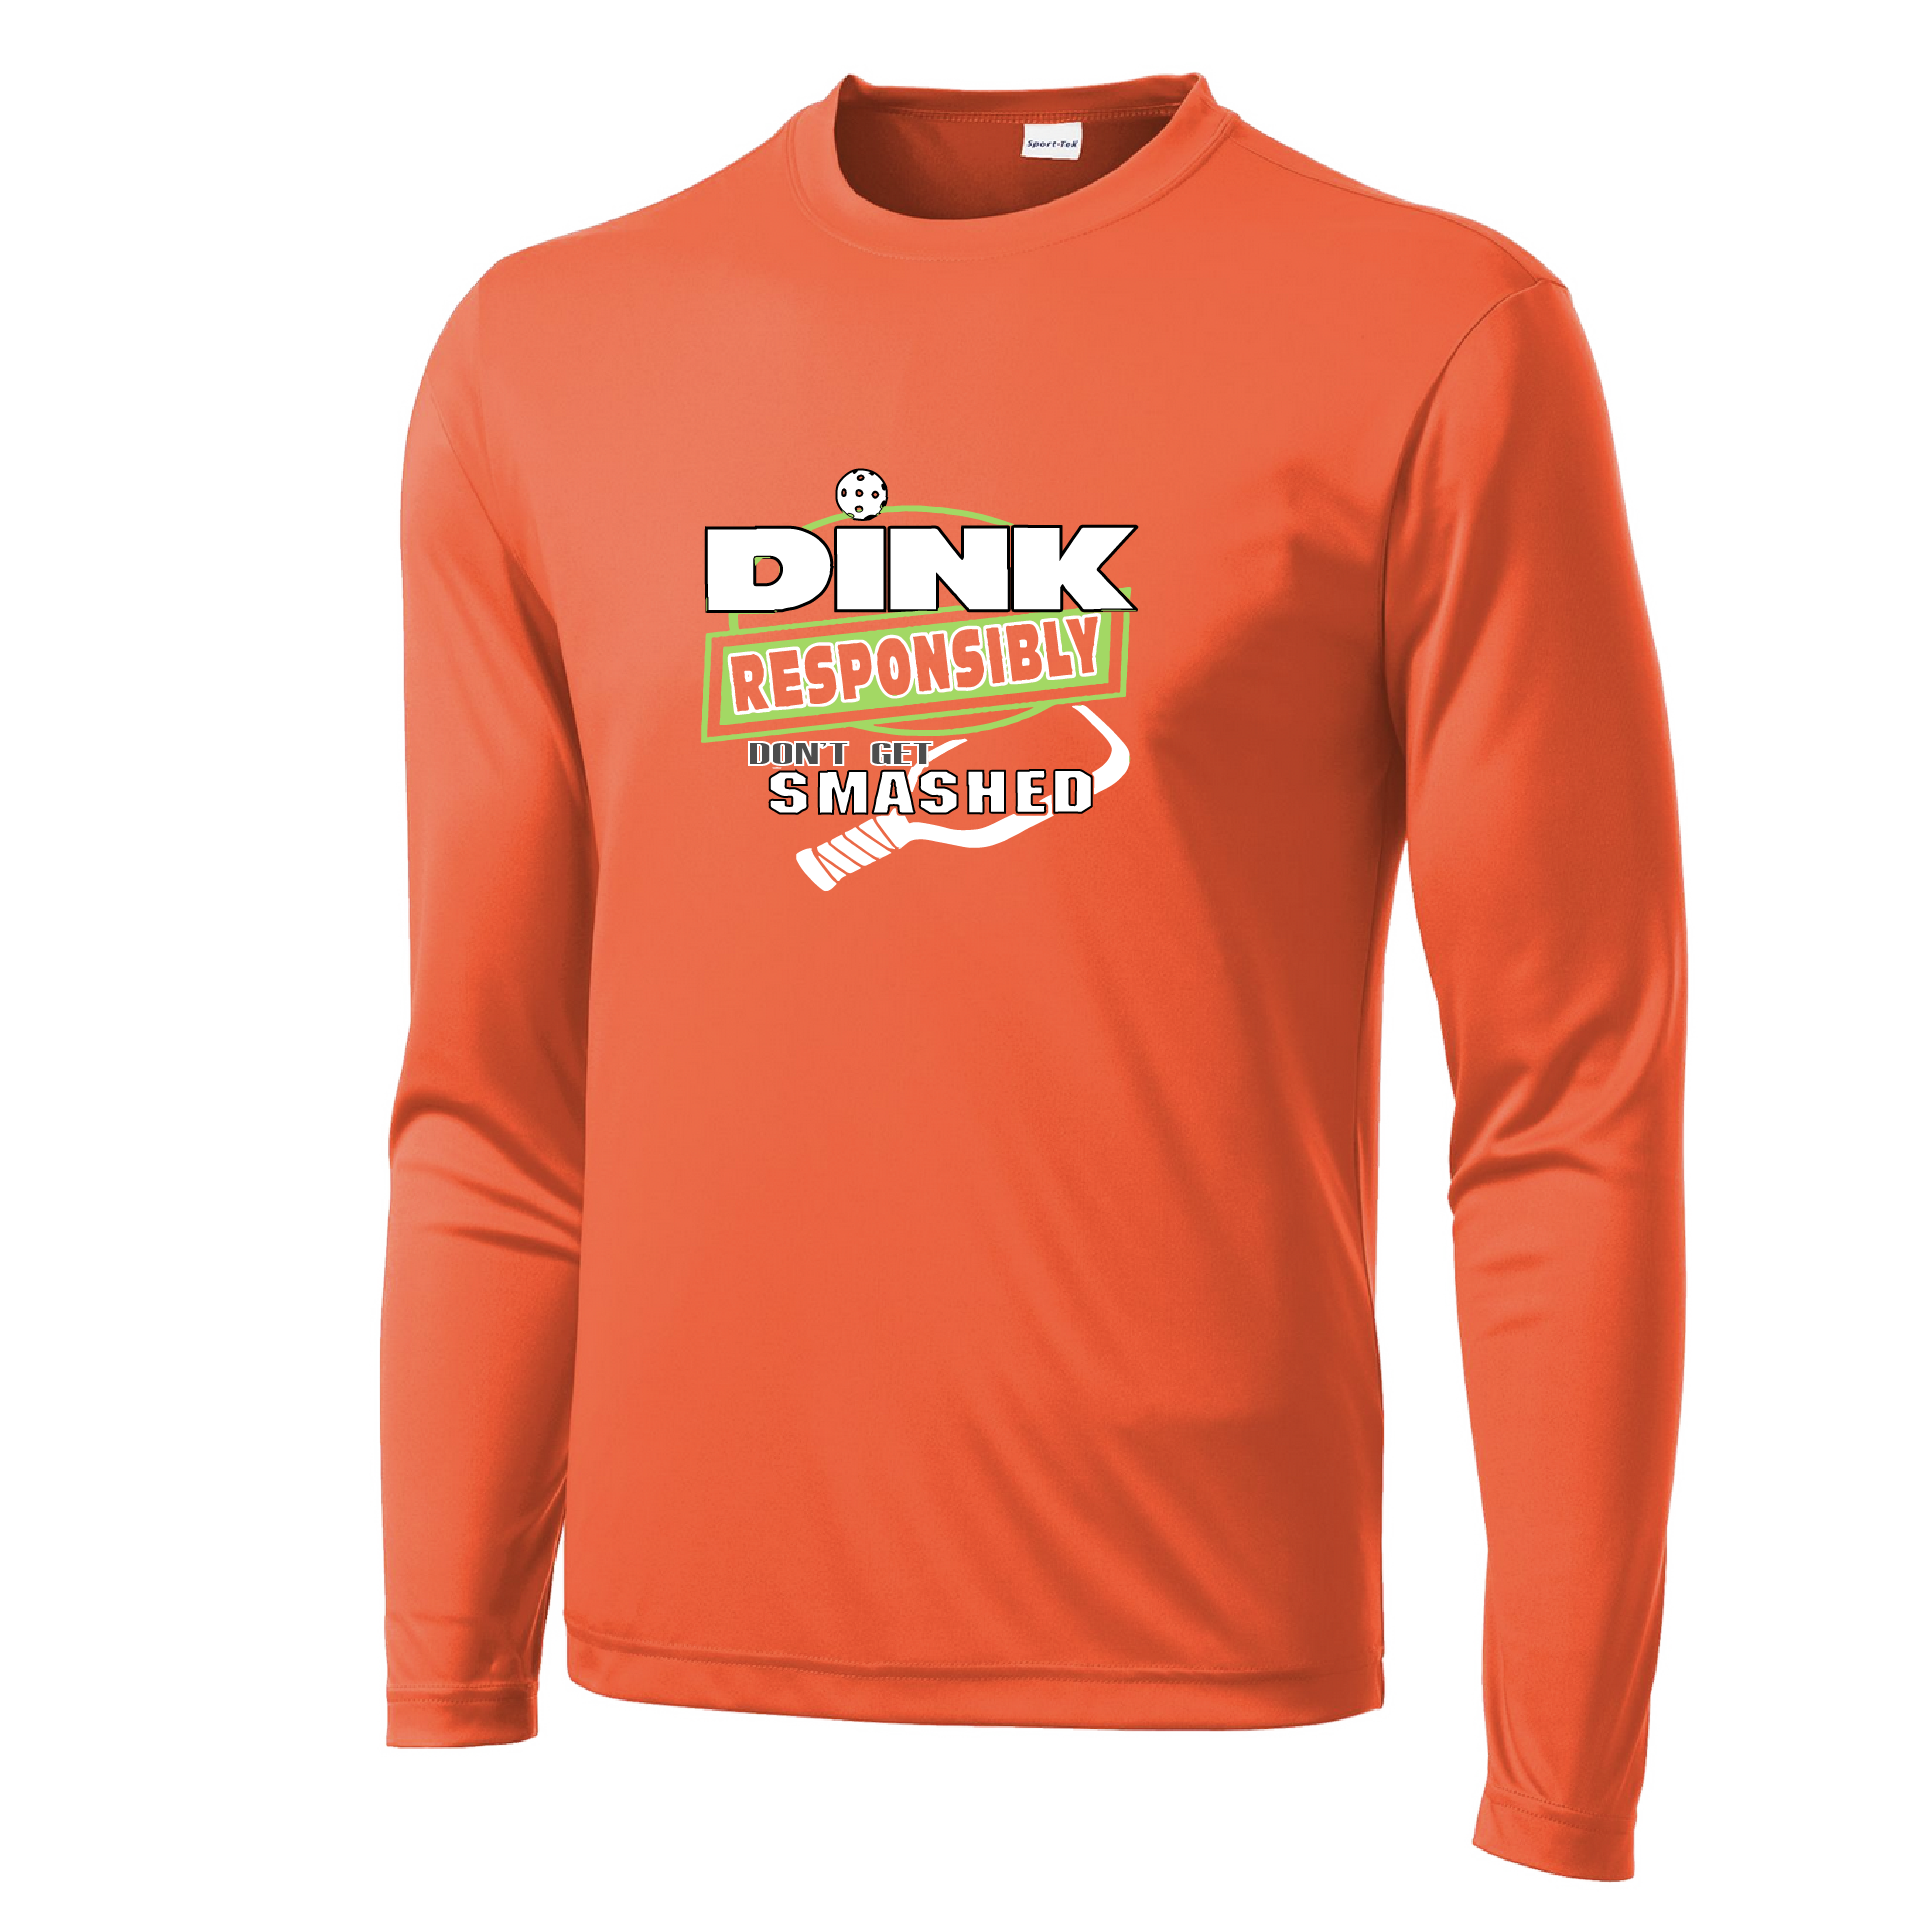 Pickleball Design: Dink Responsibly - Don't Get Smashed  Men's Style: Long Sleeve  Shirts are lightweight, roomy and highly breathable. These moisture-wicking shirts are designed for athletic performance. They feature PosiCharge technology to lock in color and prevent logos from fading. Removable tag and set-in sleeves for comfort.